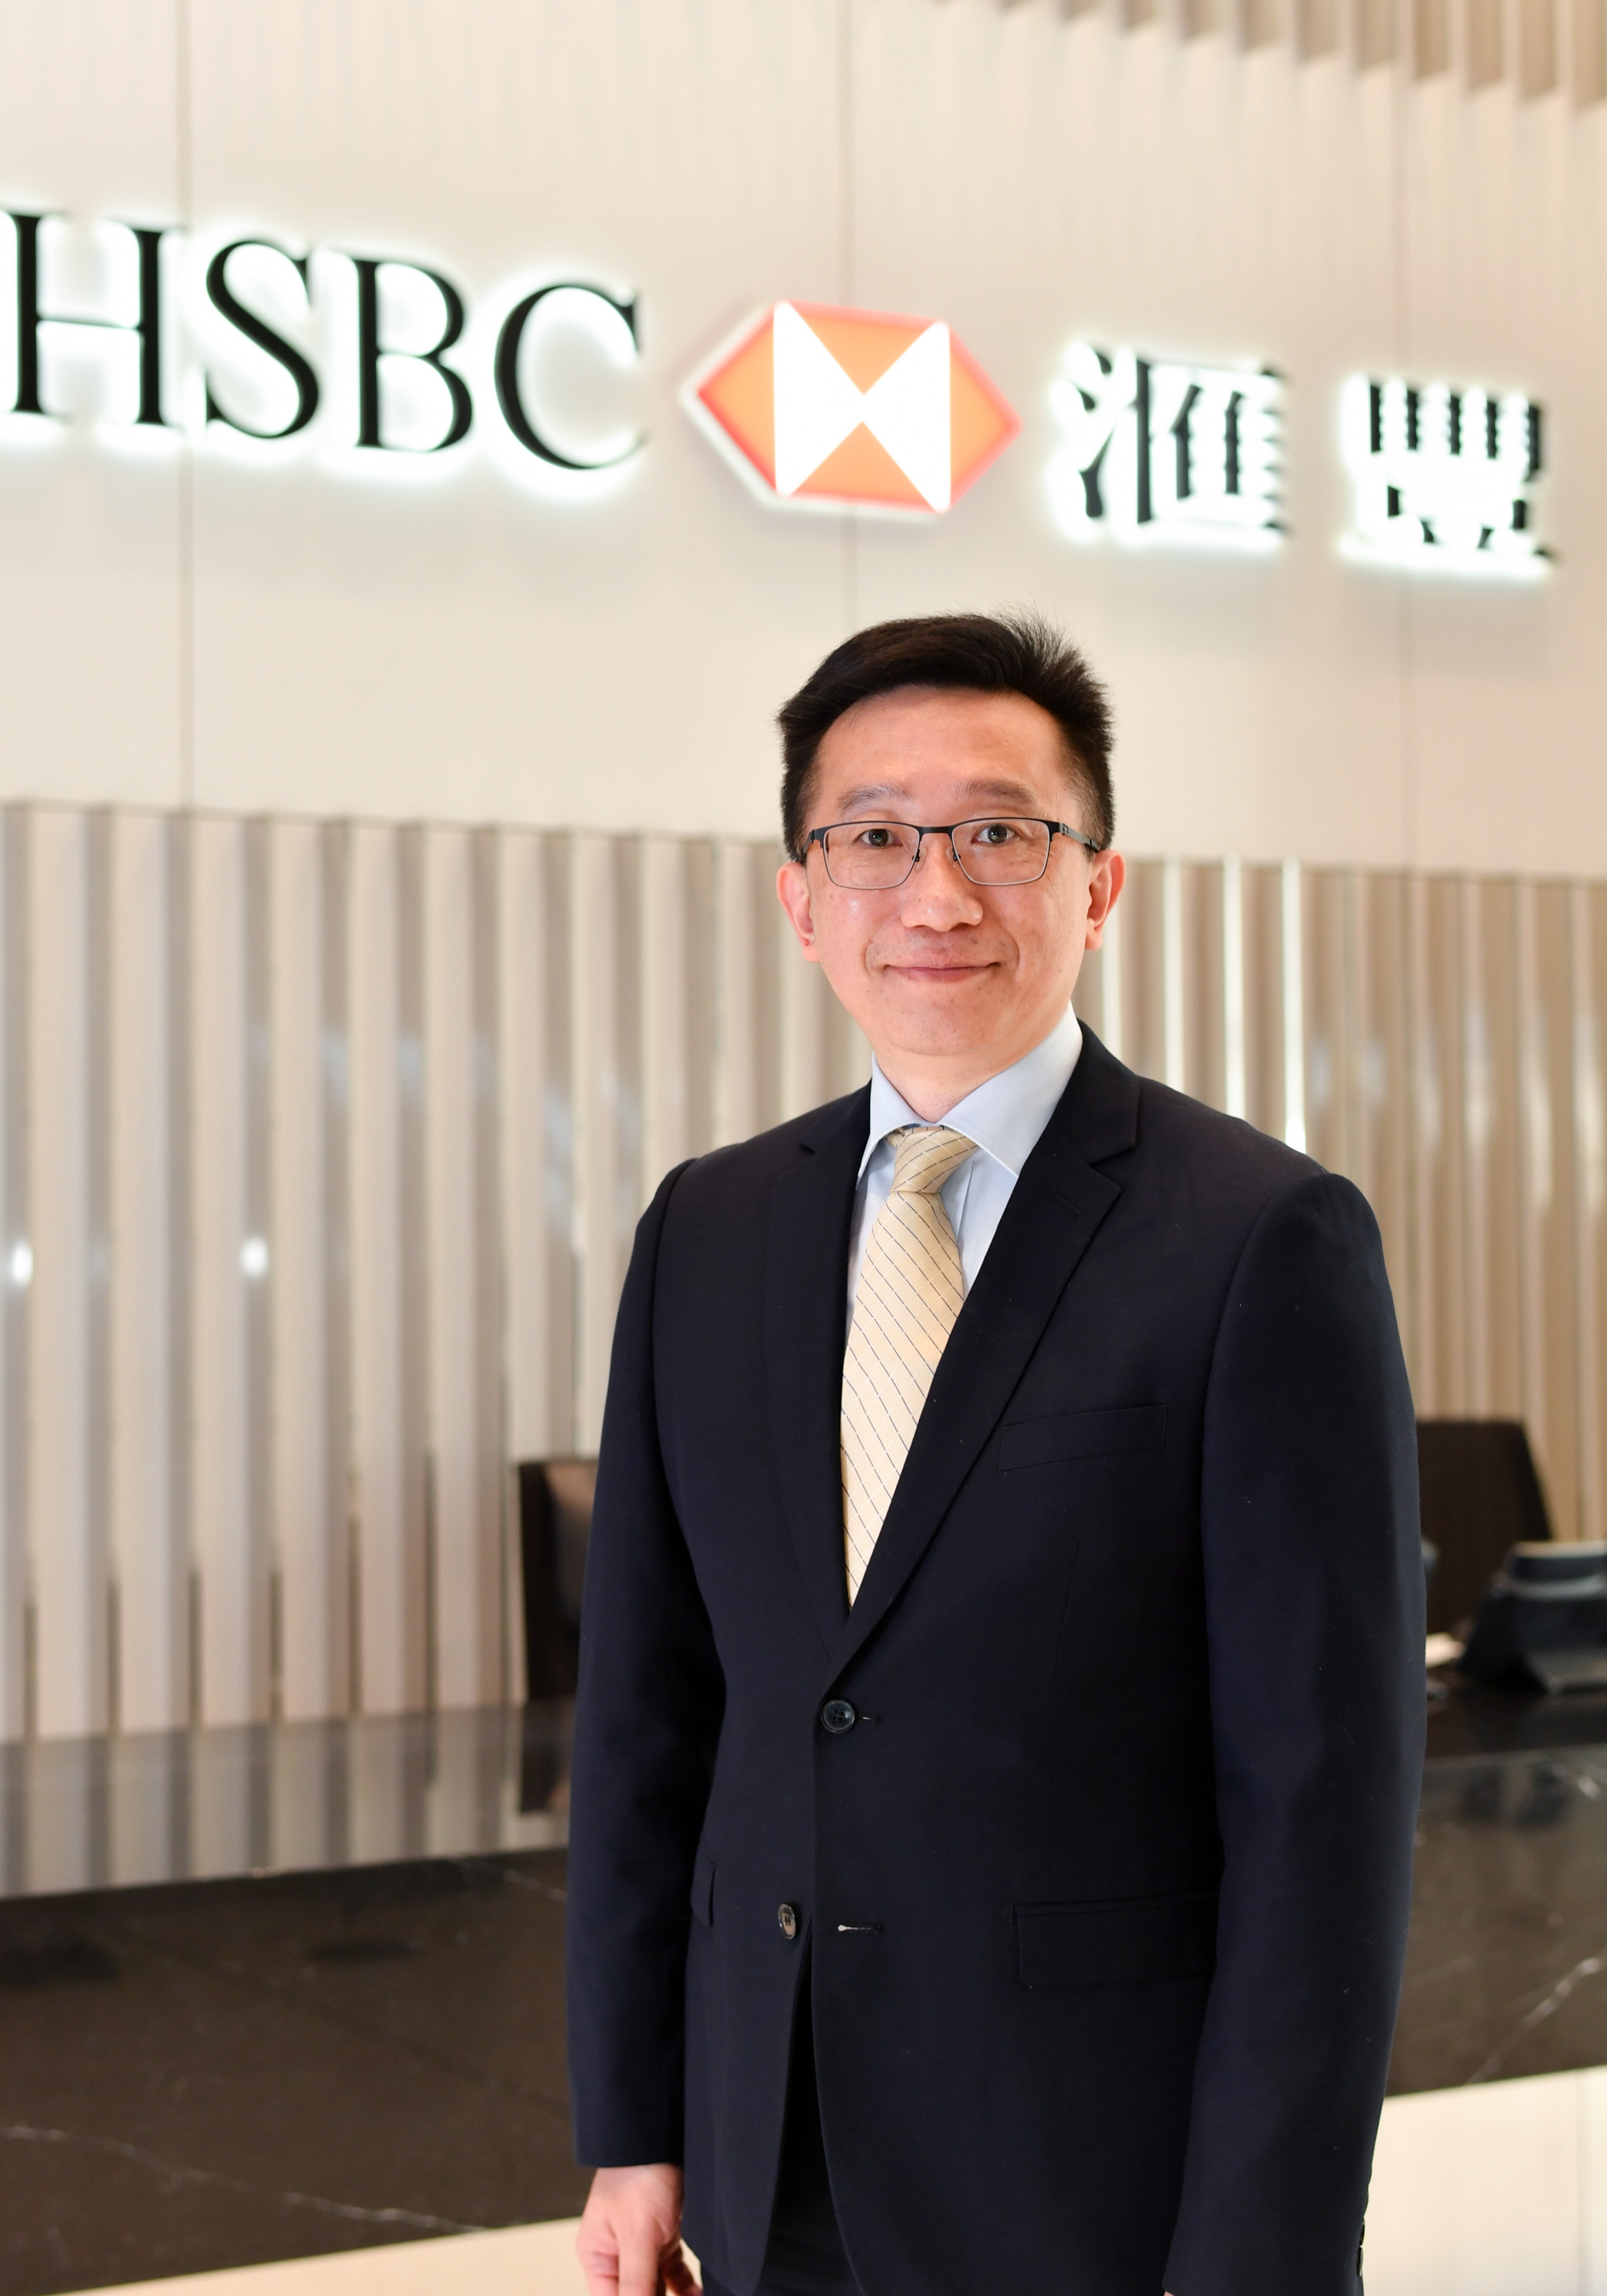 Tak Fong Lo, Head of Pensions, Hong Kong, HSBC believes a sustainable investment strategy not only fulfills social responsibility, but also helps MPF members achieve long-term returns. (Pictures are for reference and illustration only, and should not be regarded as investment recommendation and advice)